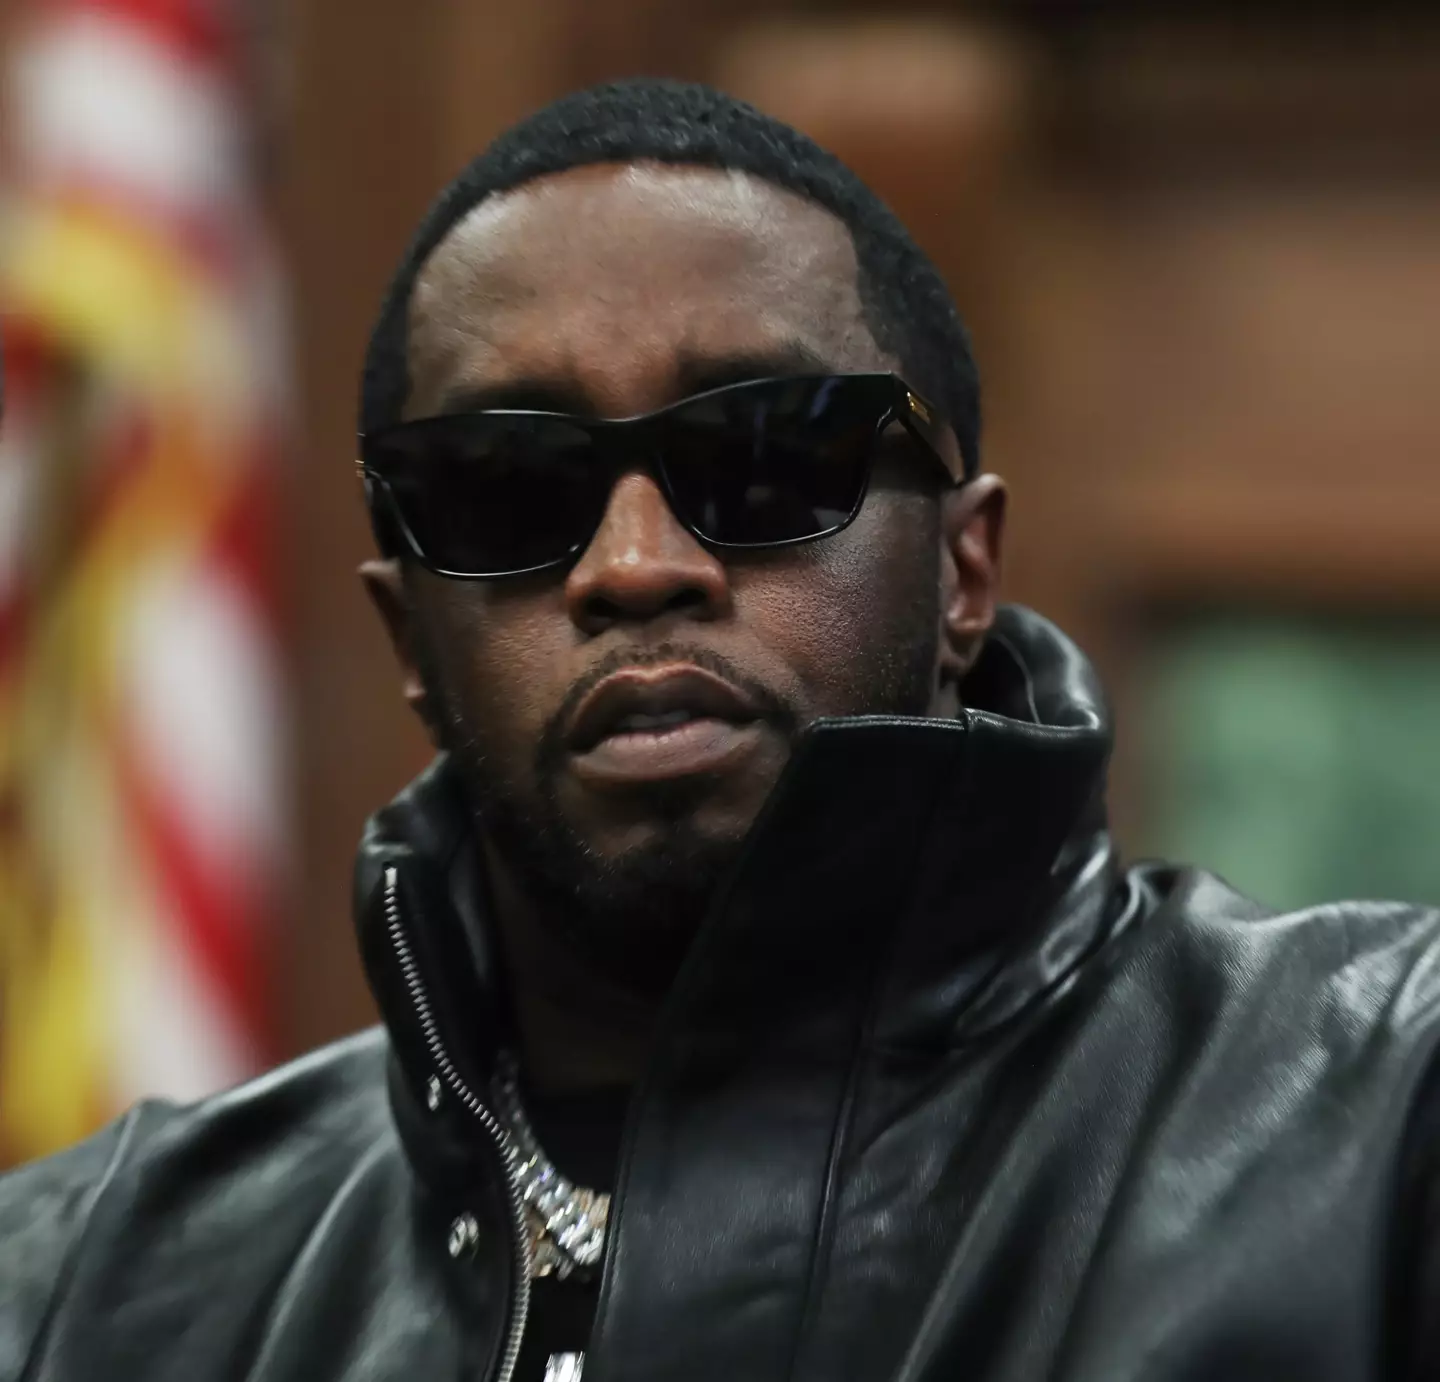 Sean Combs has faced multiple lawsuits the past year. (Shareif Ziyadat/Getty Images for Sean "Diddy" Combs)